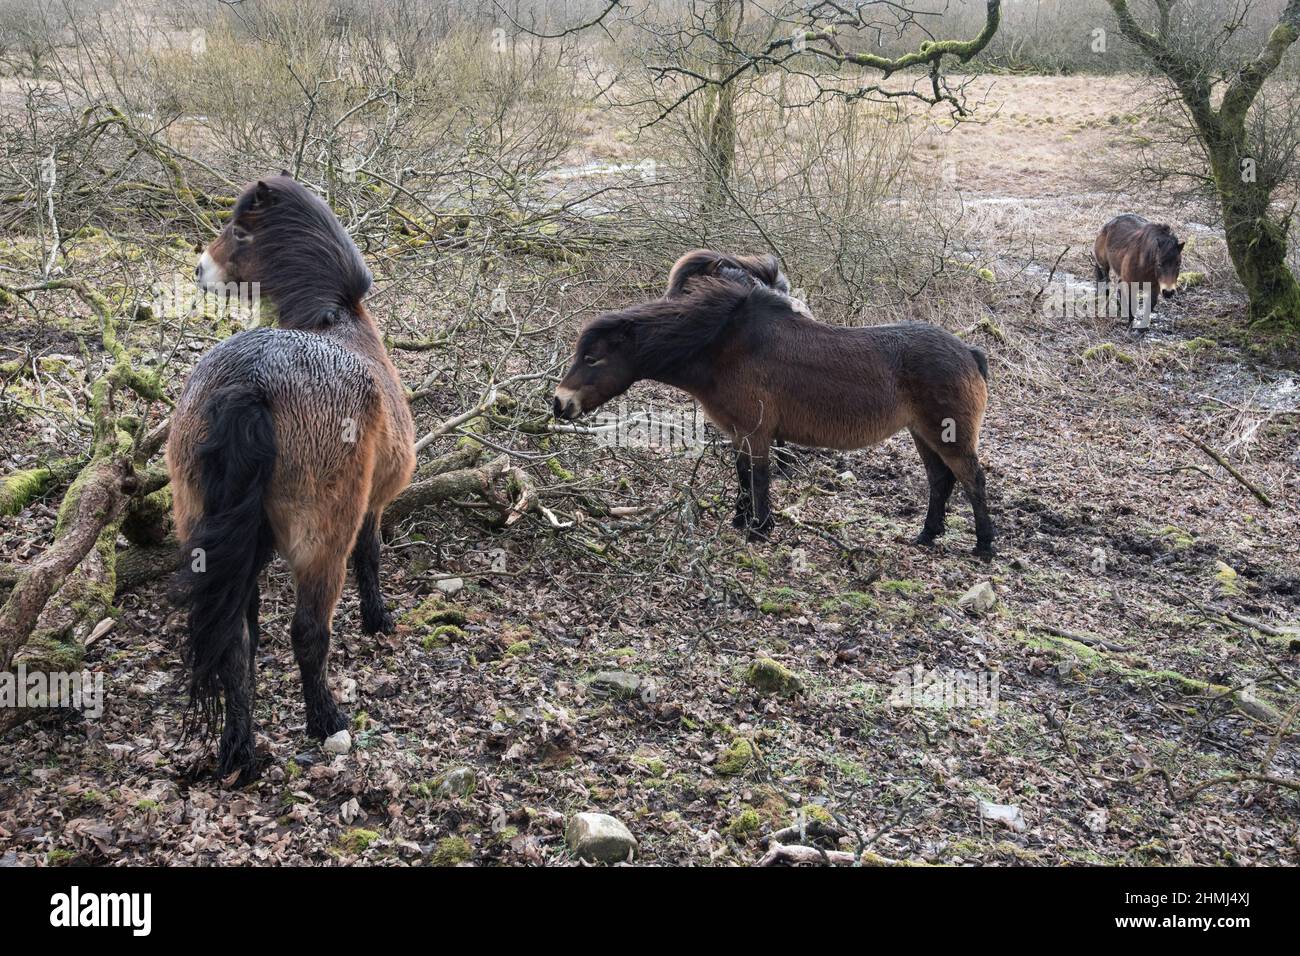 Britain’s oldest breed of native pony (Exmoor) on loan to Malham Tarn Estate to manage plants & habitat on Site of Special Scientific Interest. Stock Photo